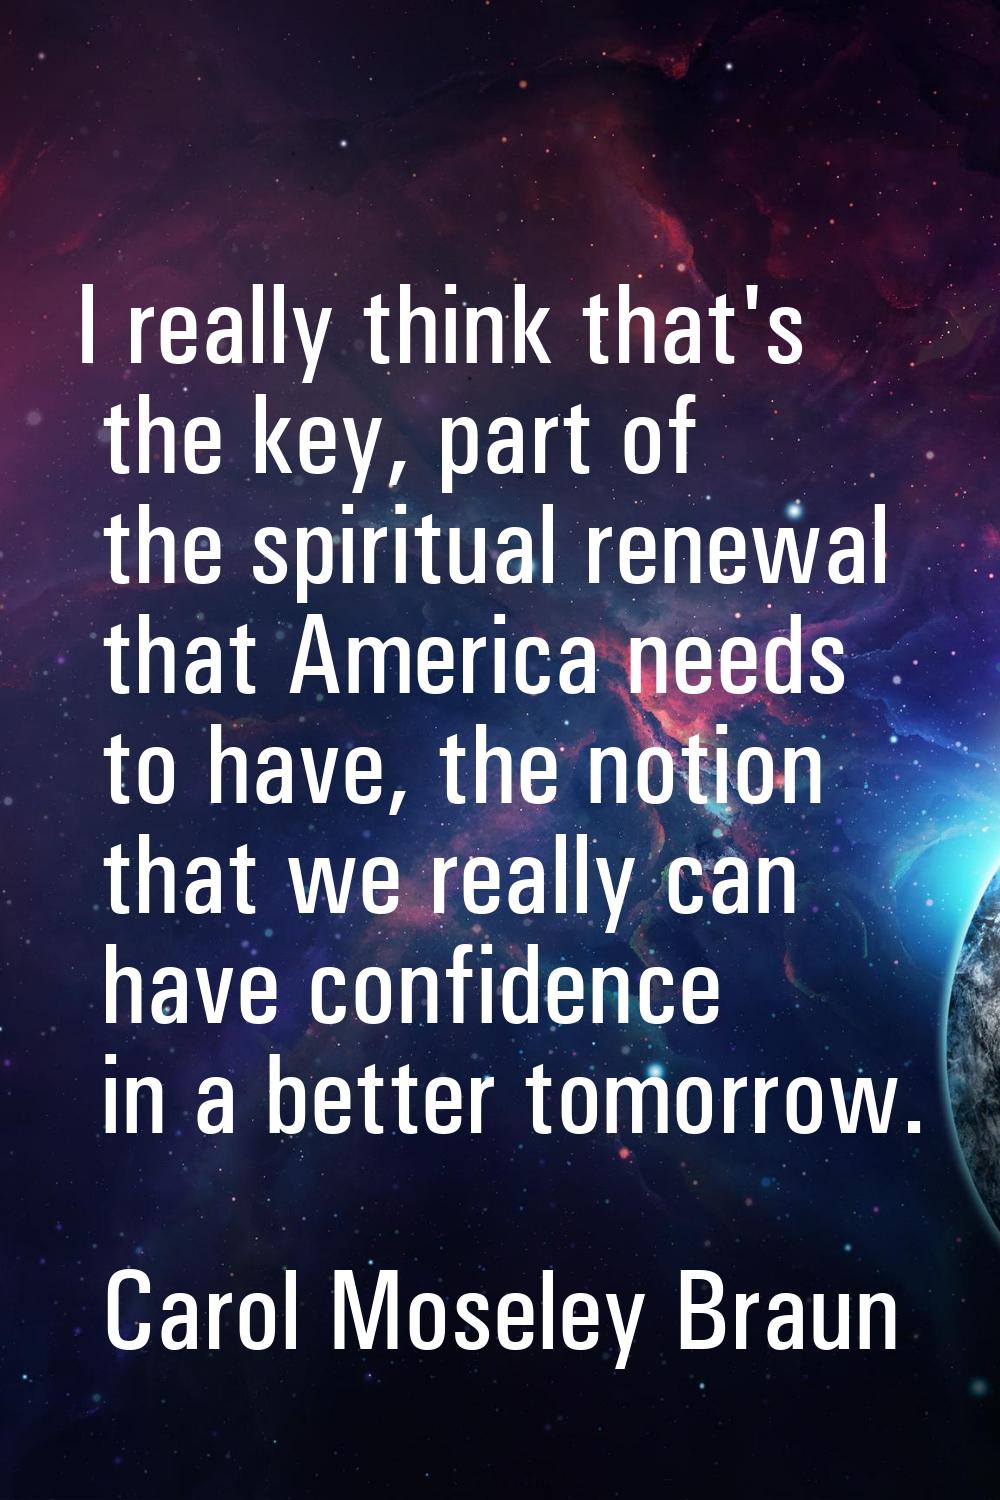 I really think that's the key, part of the spiritual renewal that America needs to have, the notion